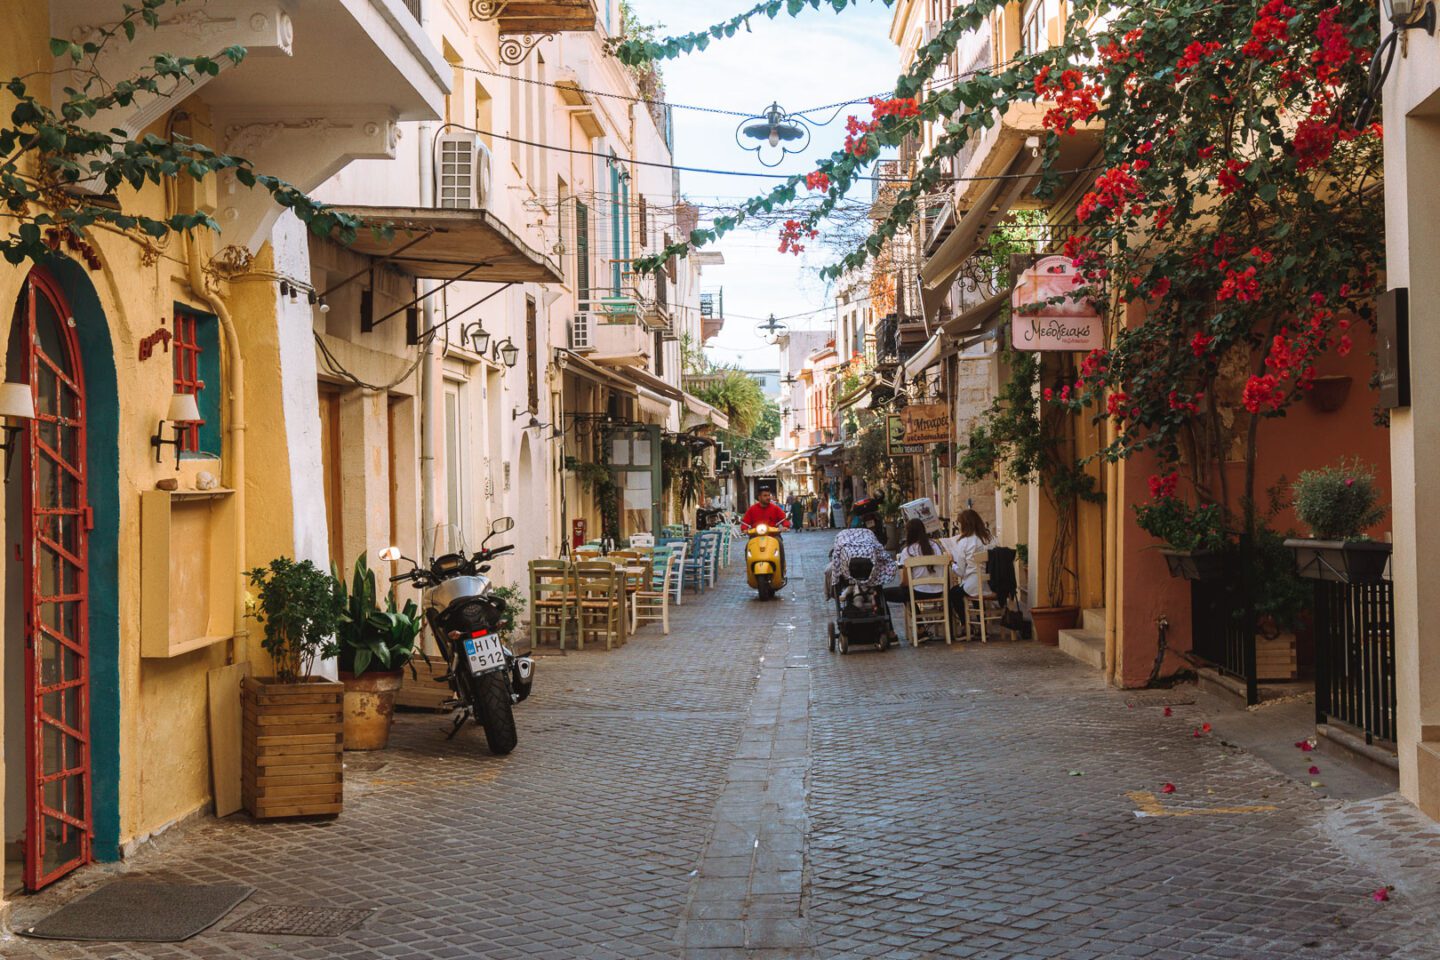 A man on a yellow vespa rides through the quiet old town of Chania Crete. 